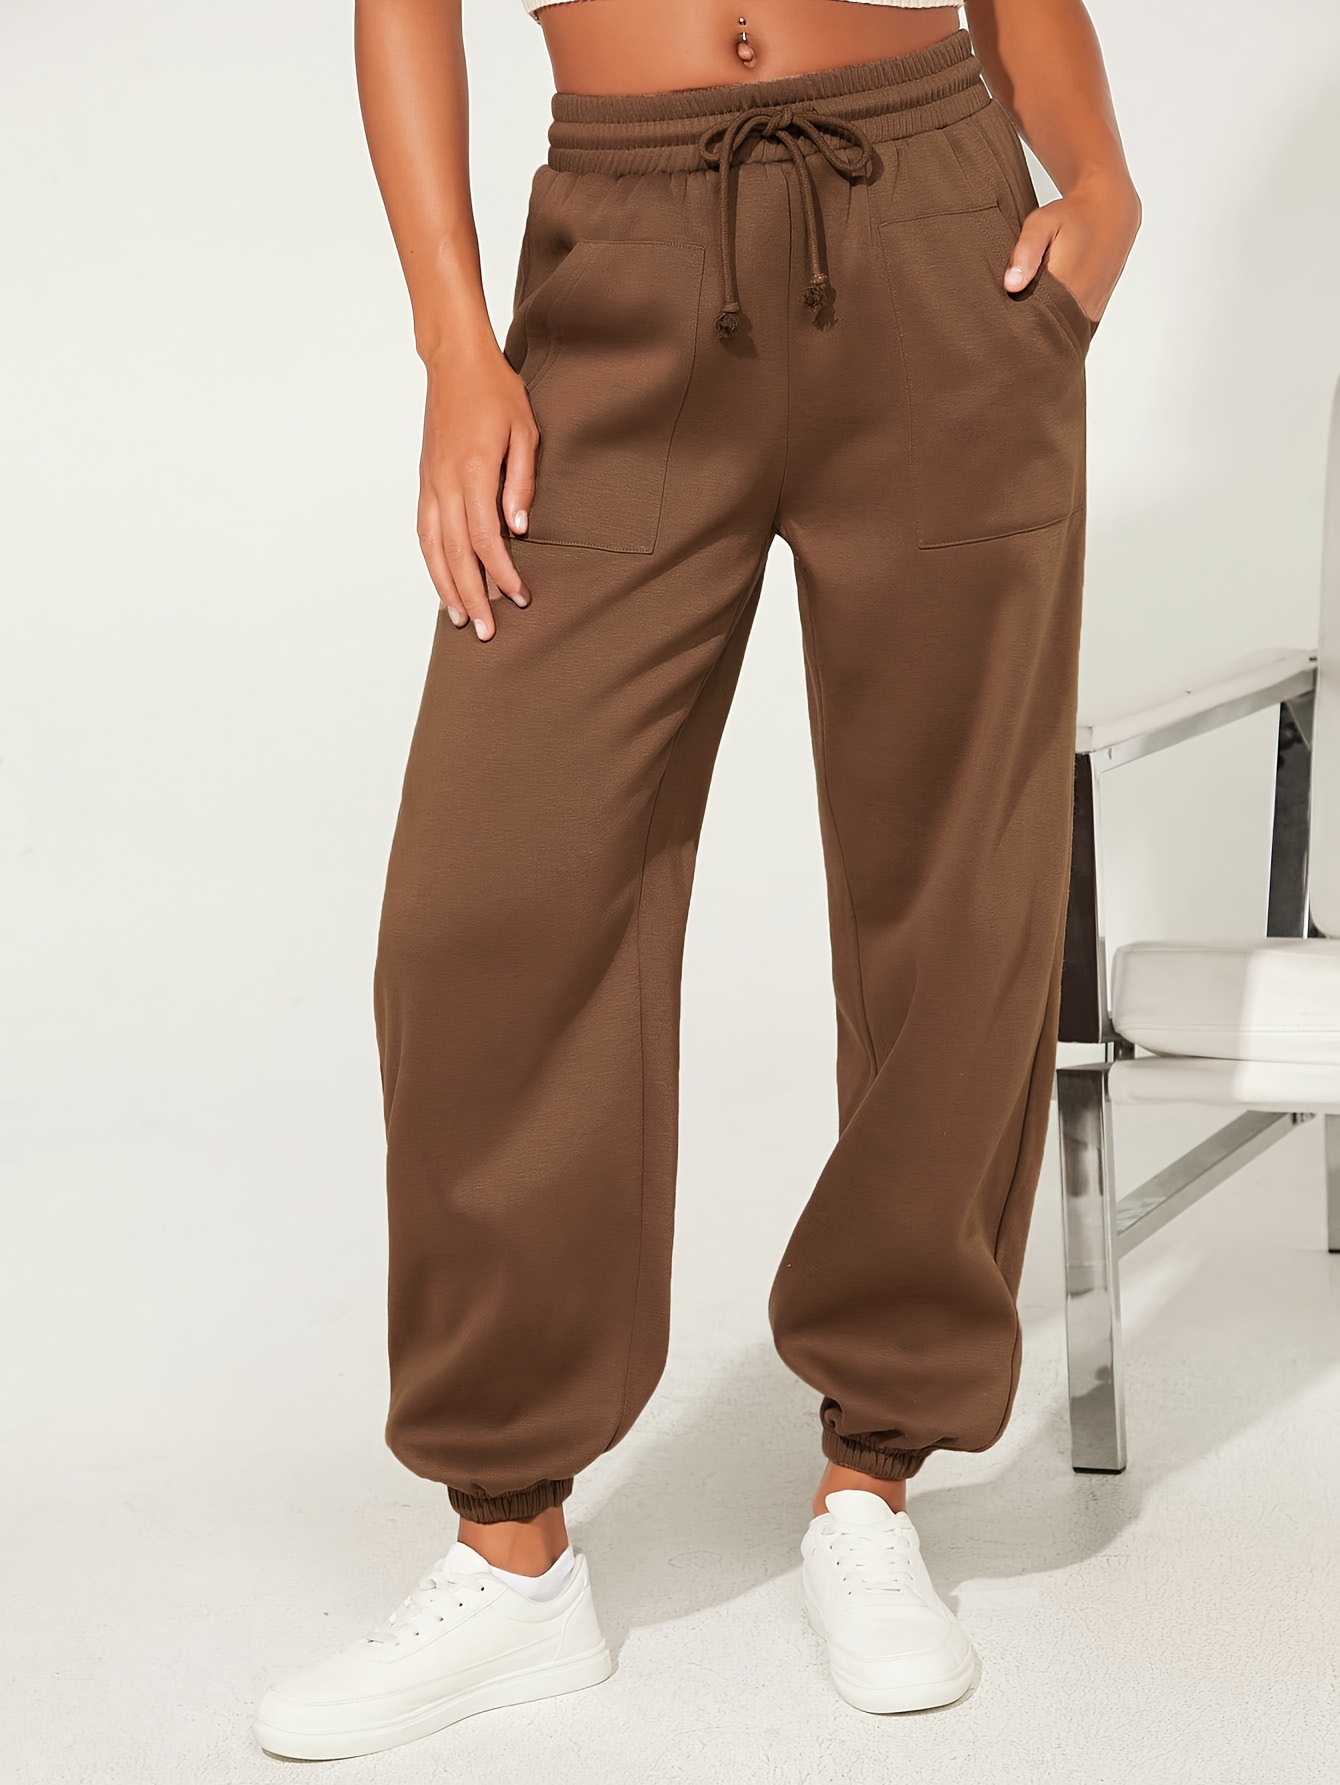 Womens Sweatpants with Pockets Bottom Sweatpants for Women with